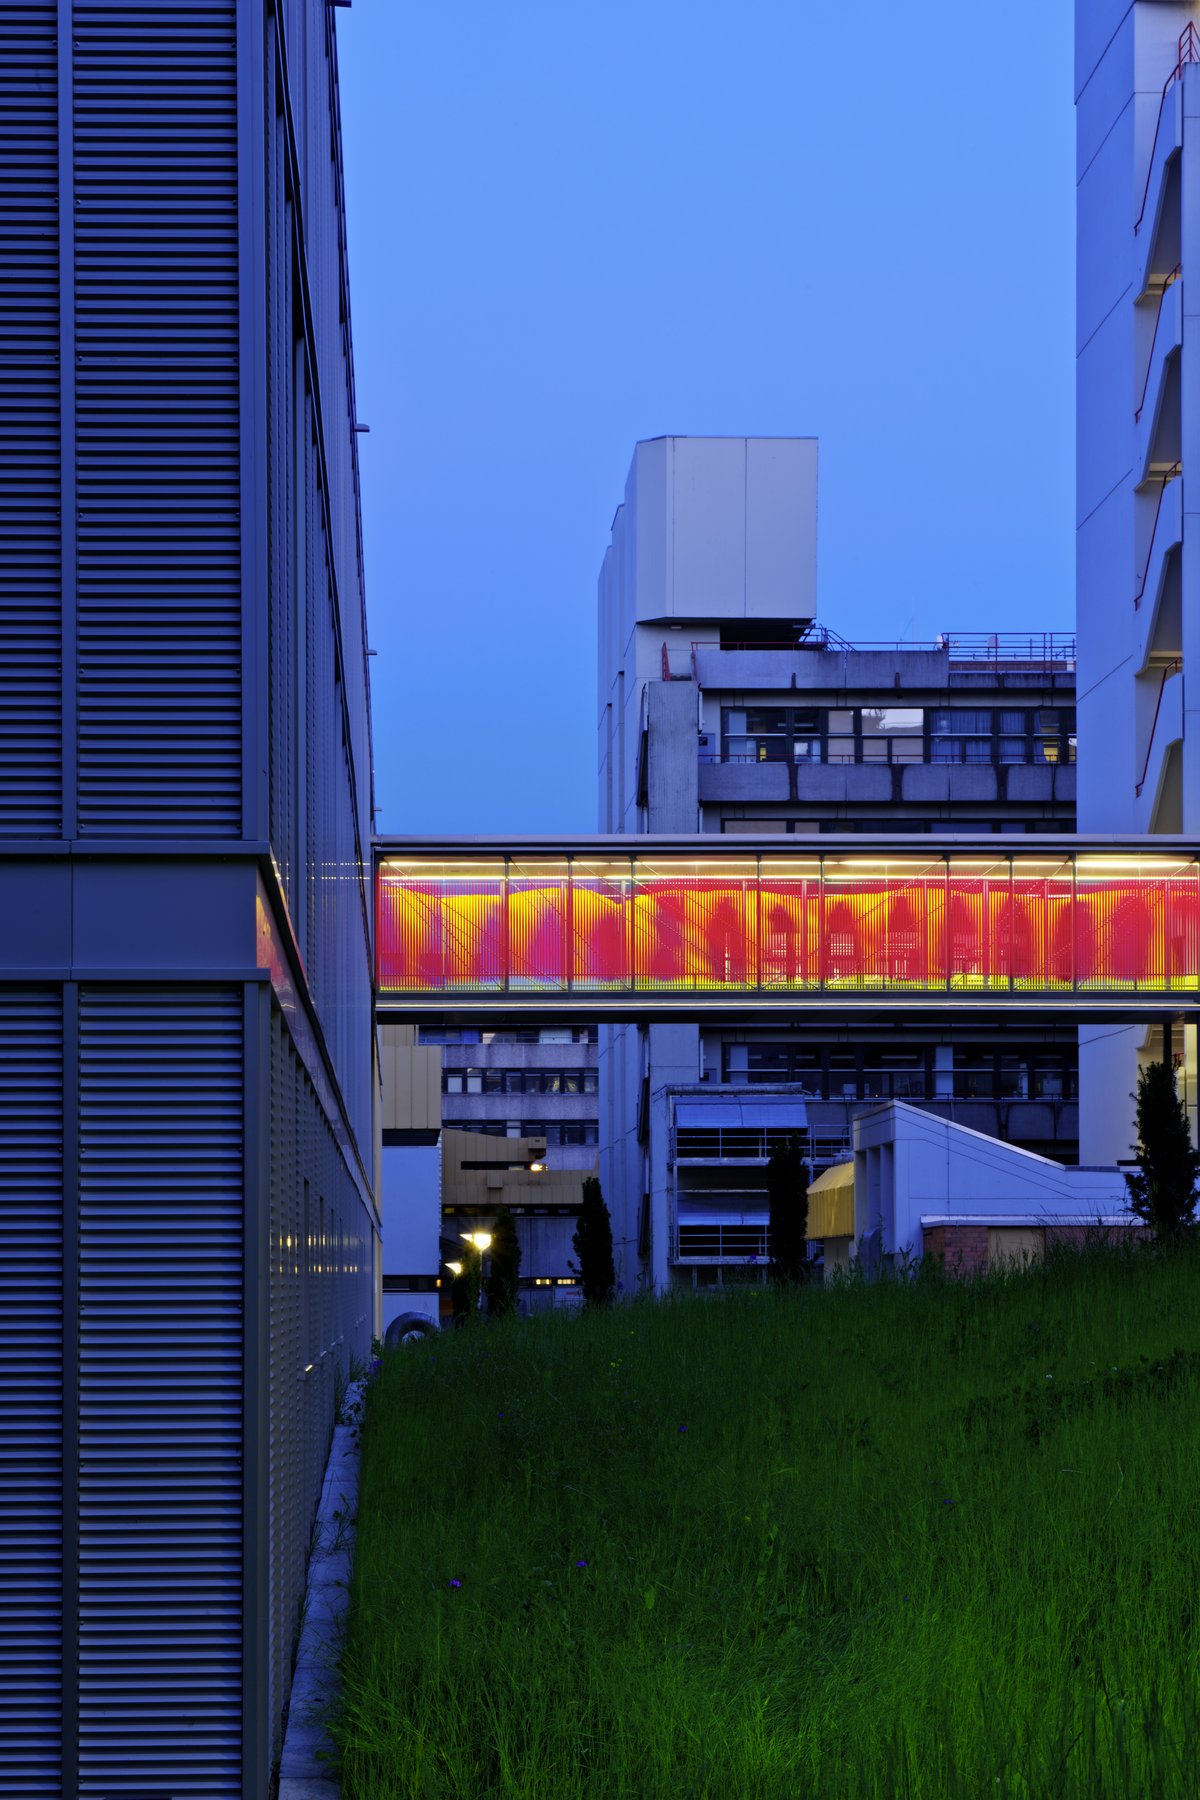 Light channel illuminated in orange-red between buildings M and ML